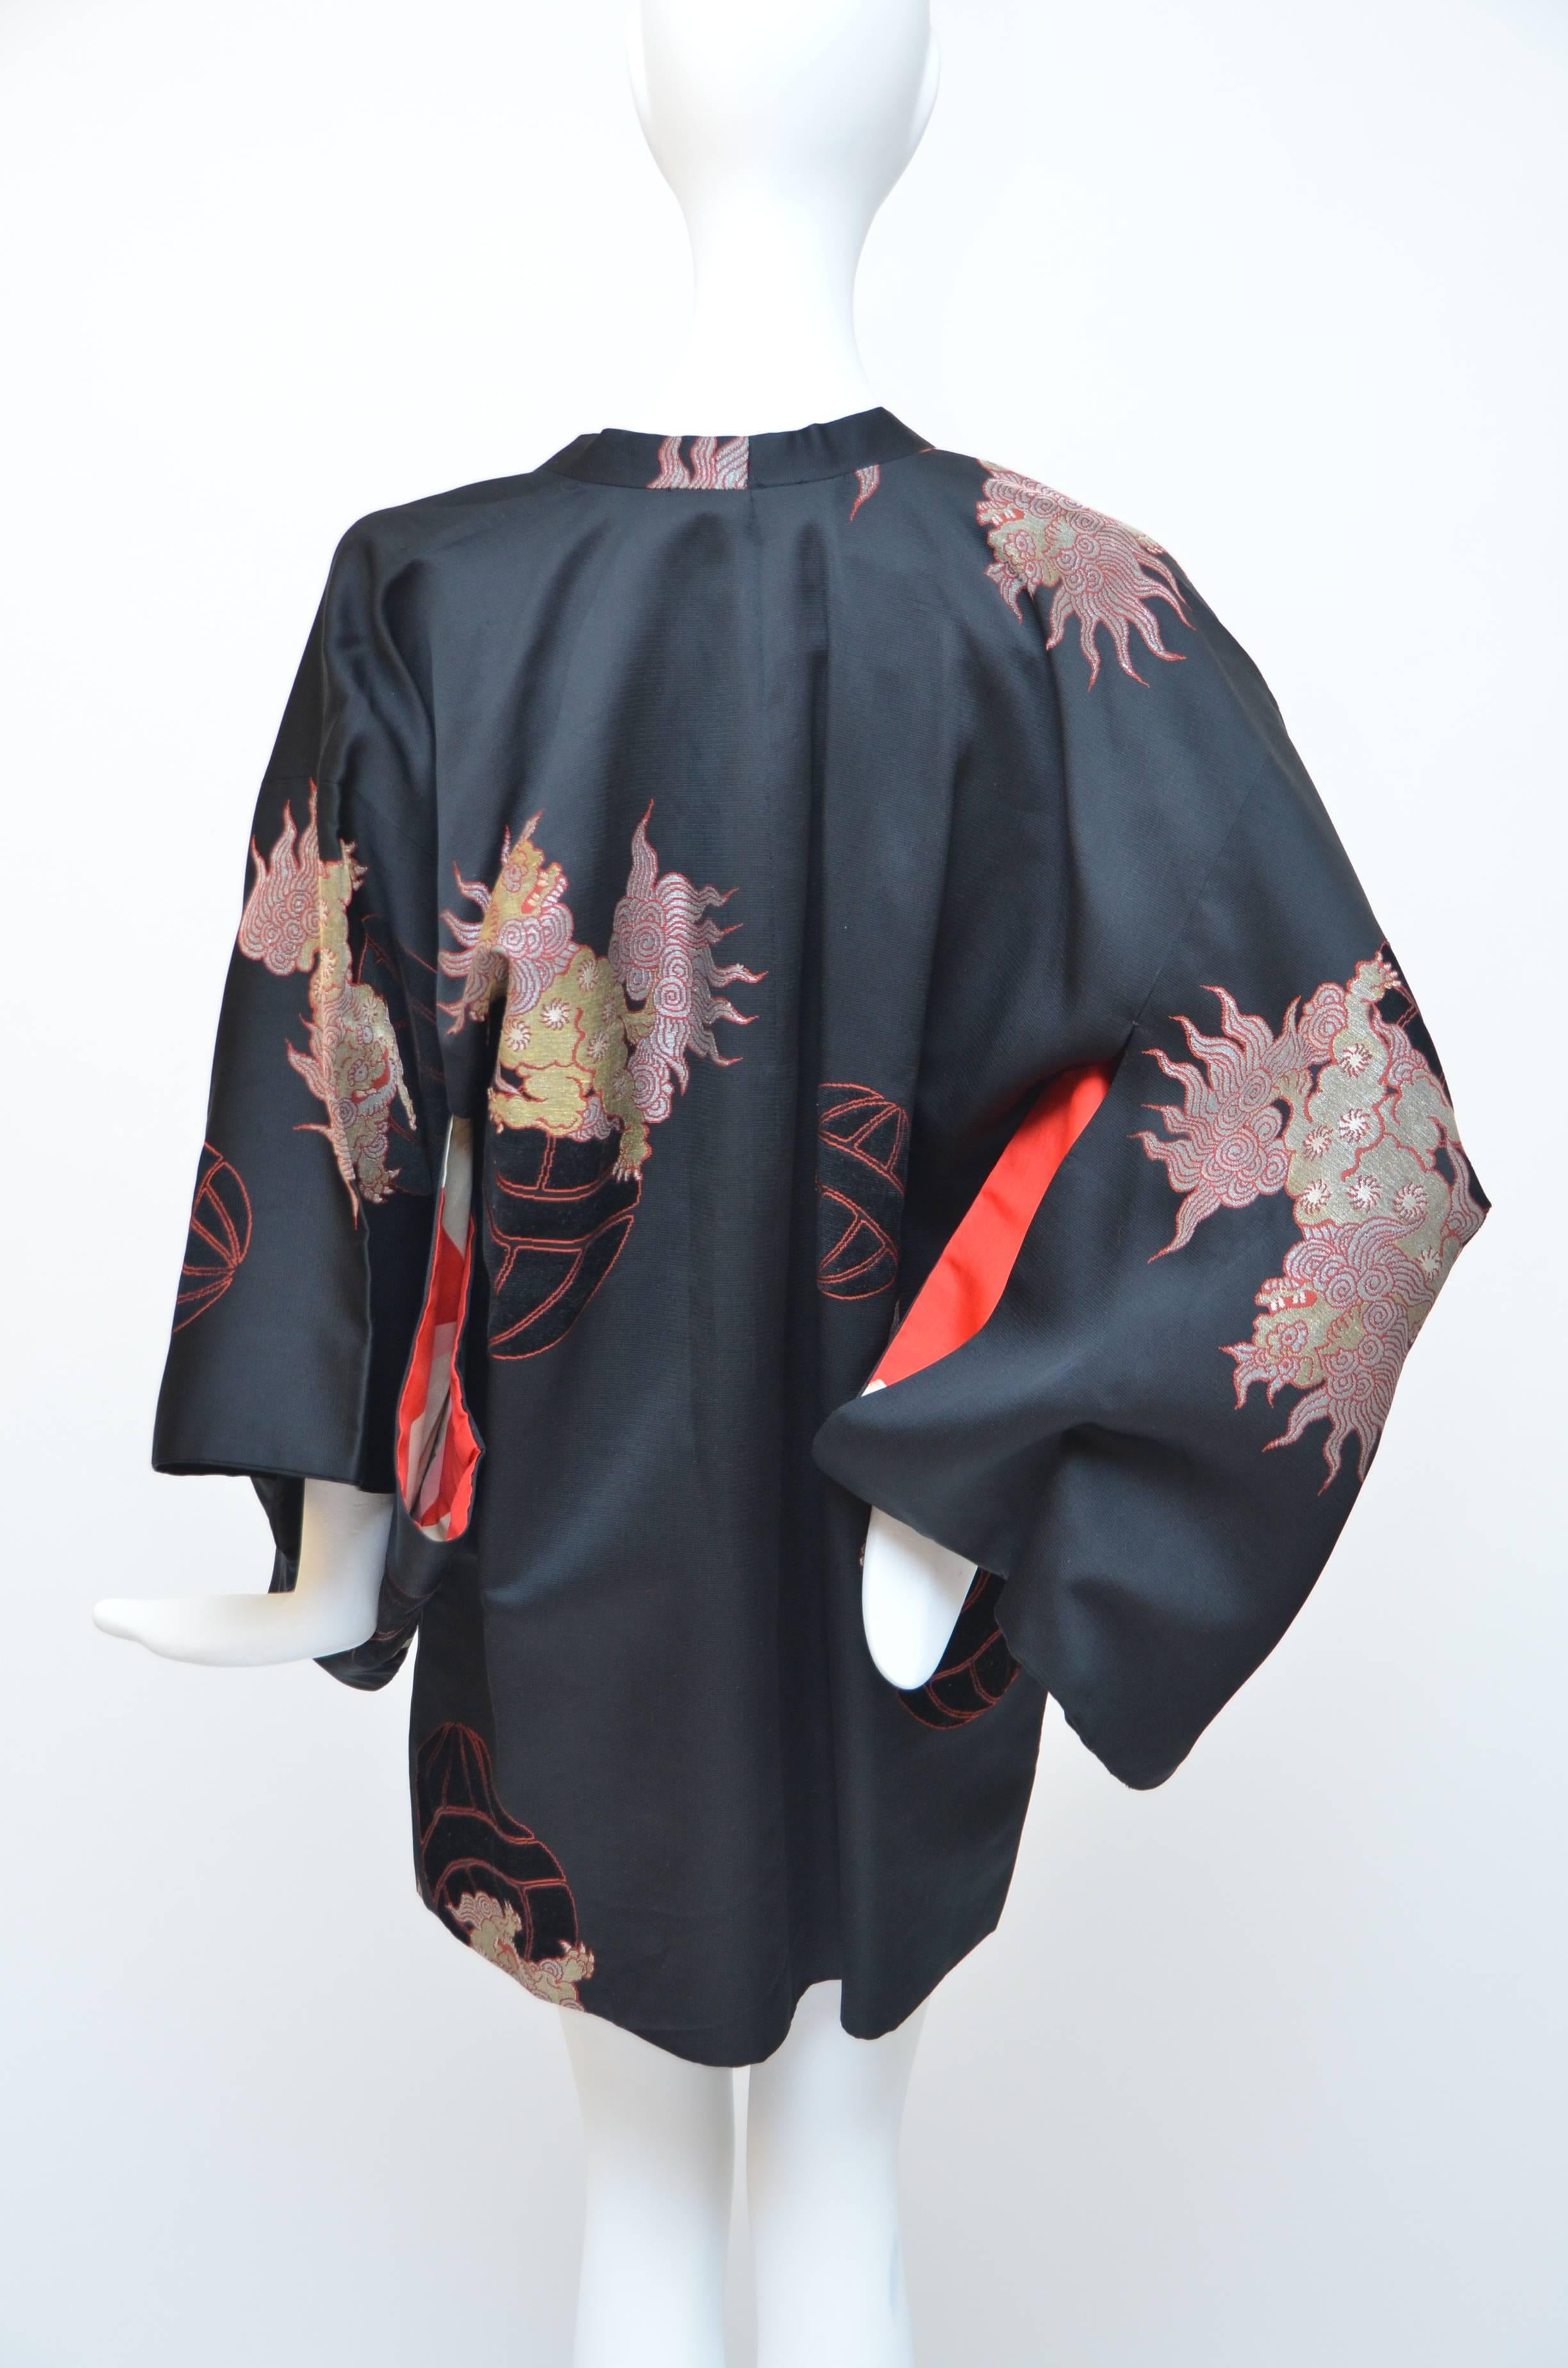 Christian Dior kimono with dragoon print.
Very good condition.
Hidden snaps closure at front.   
Fabric content unknown, feels like a medium-weight, very slightly ribbed, silky synthetic.  
Made in France.  No size label. 
Size is somewhat flexible,